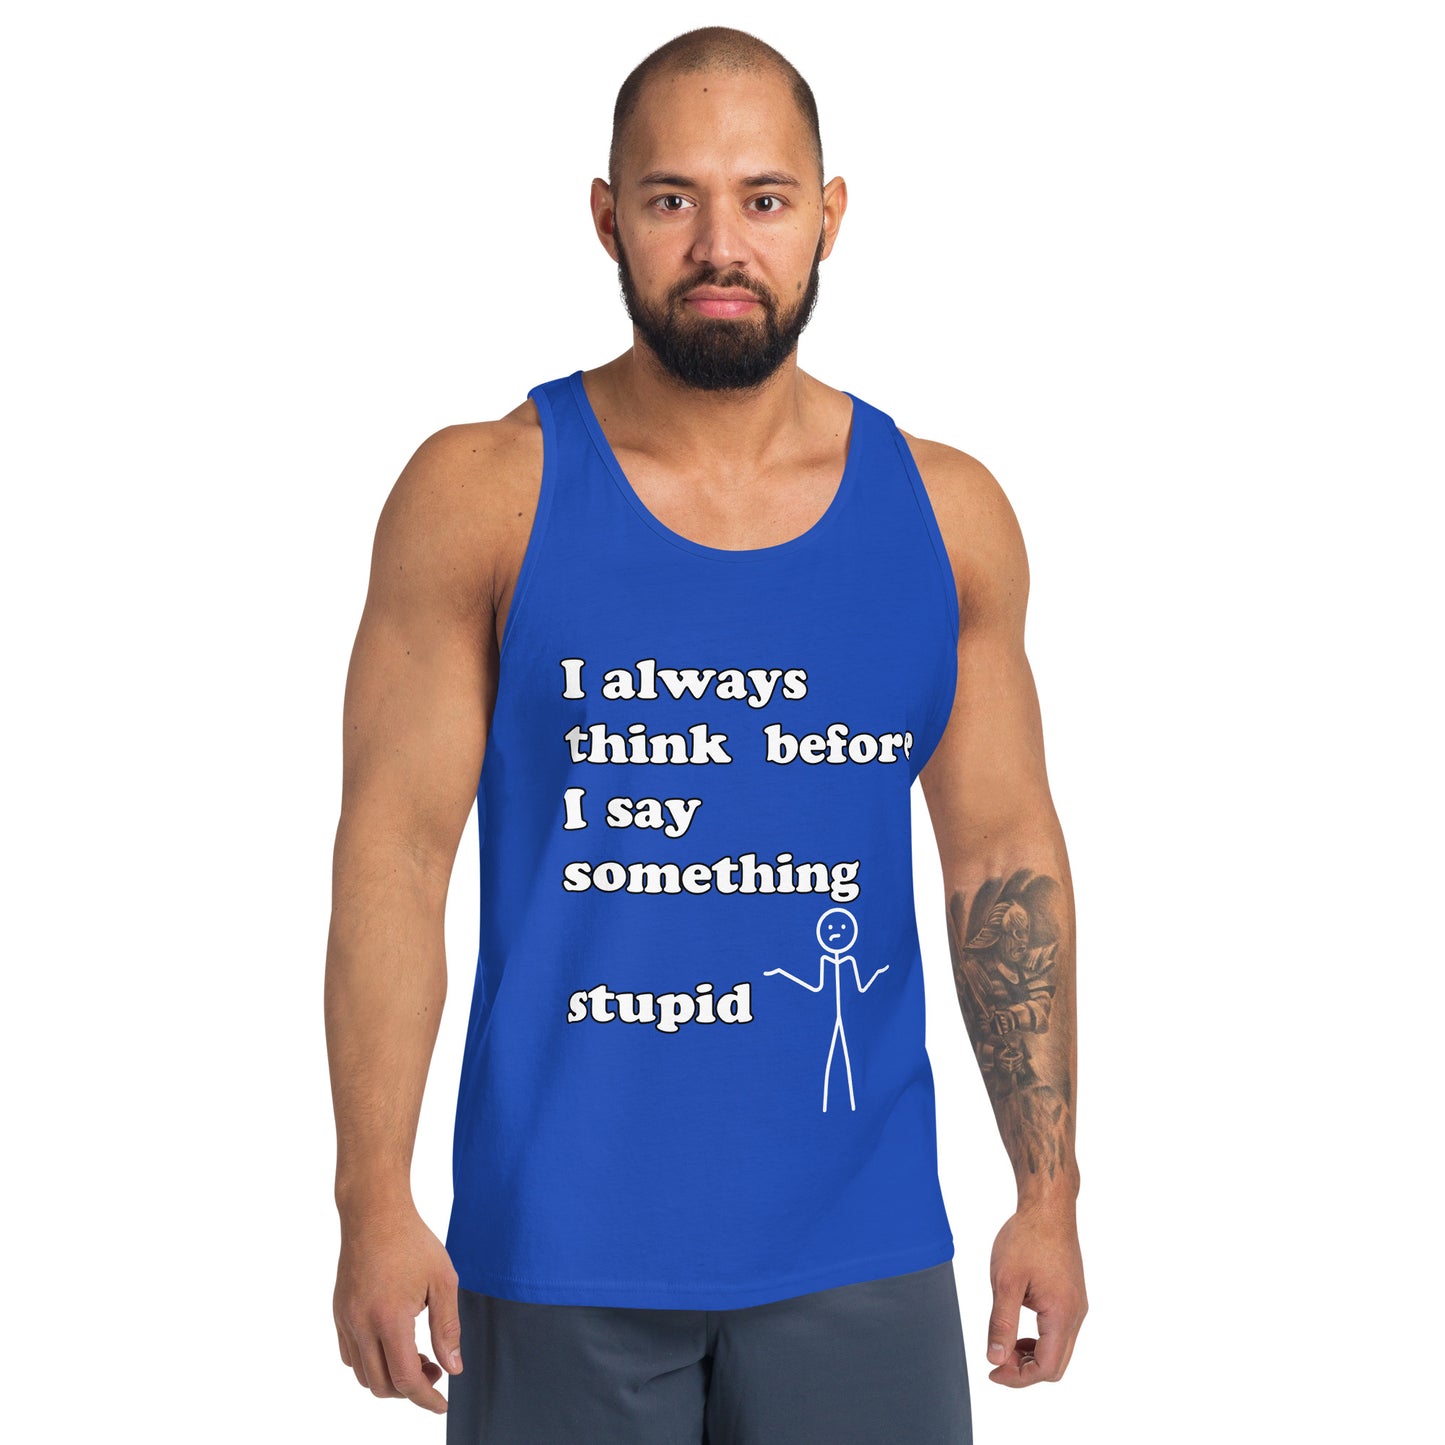 Man with royal blue tank top with text "I always think before I say something stupid"